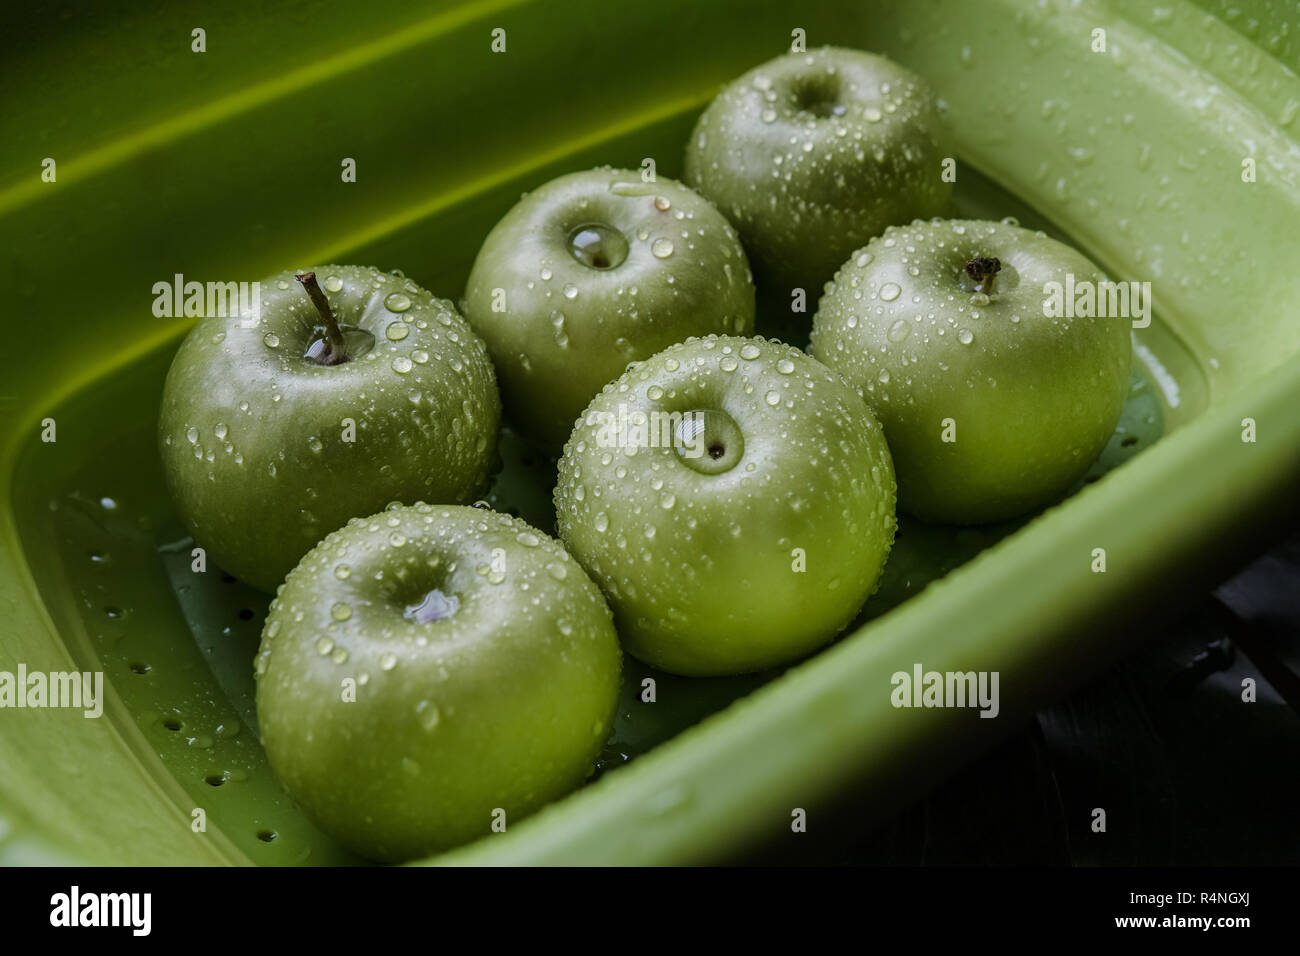 Green apples in a washing basket with water droplets on their skin. Stock Photo